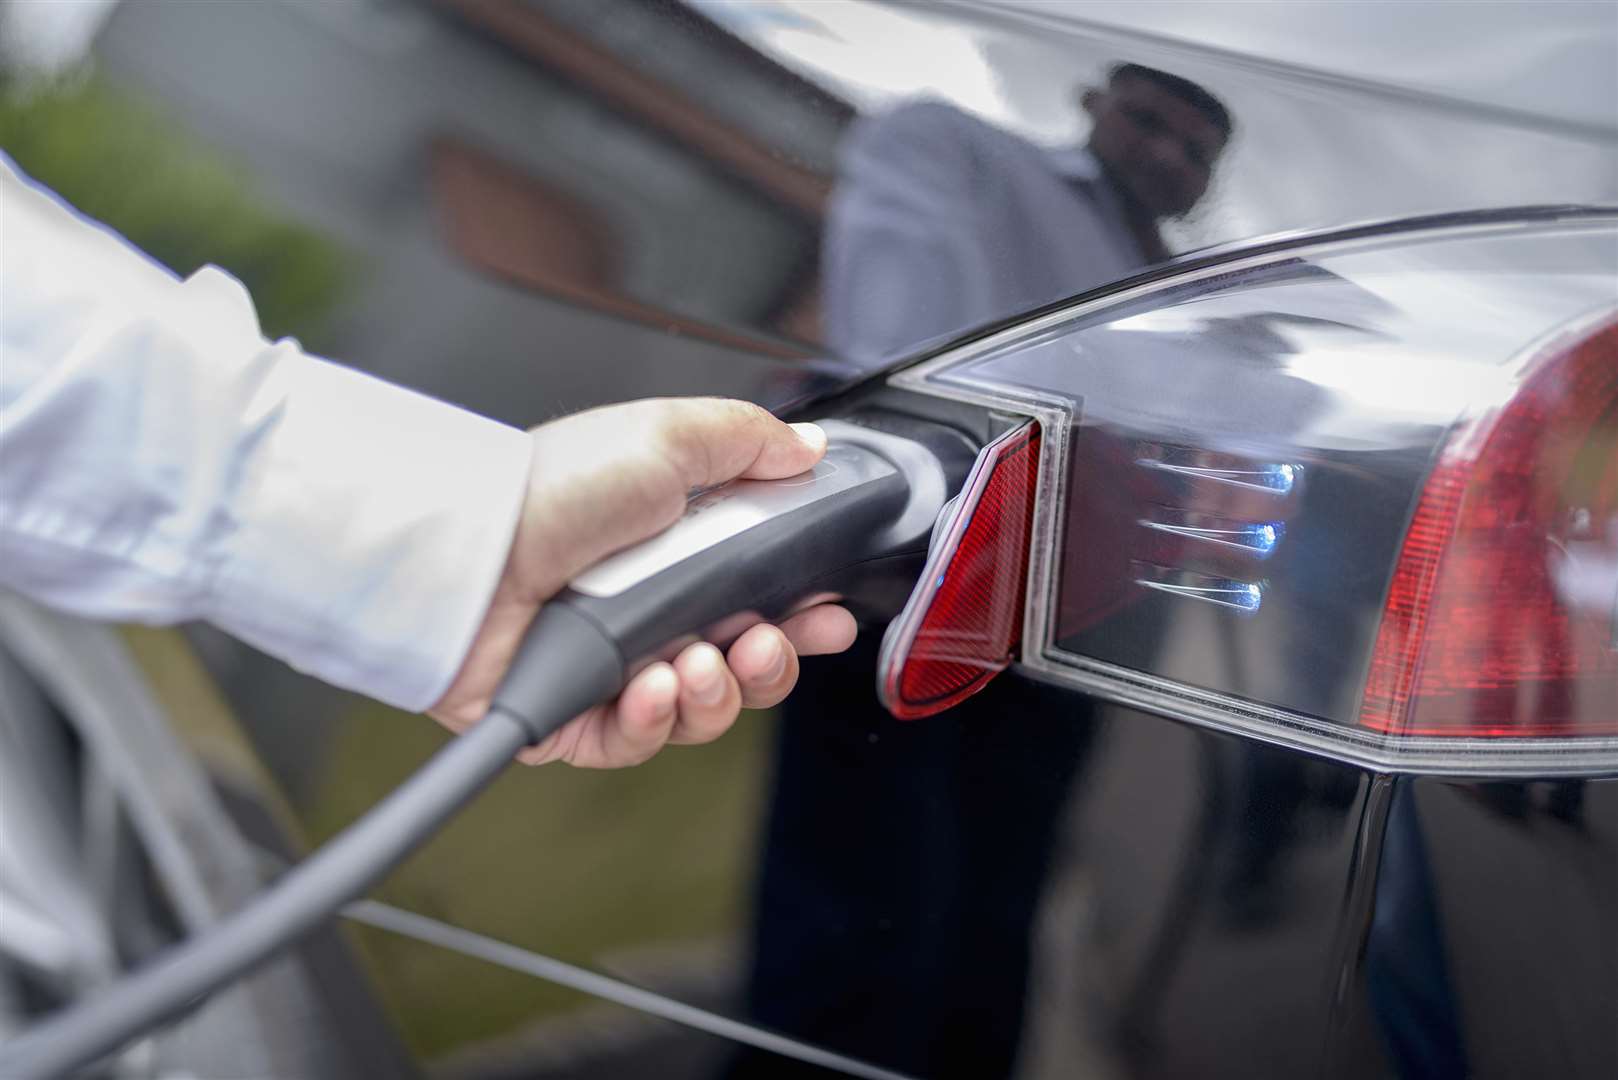 Electric vehicle chargers will need to be deployed to certain locations with little notice.